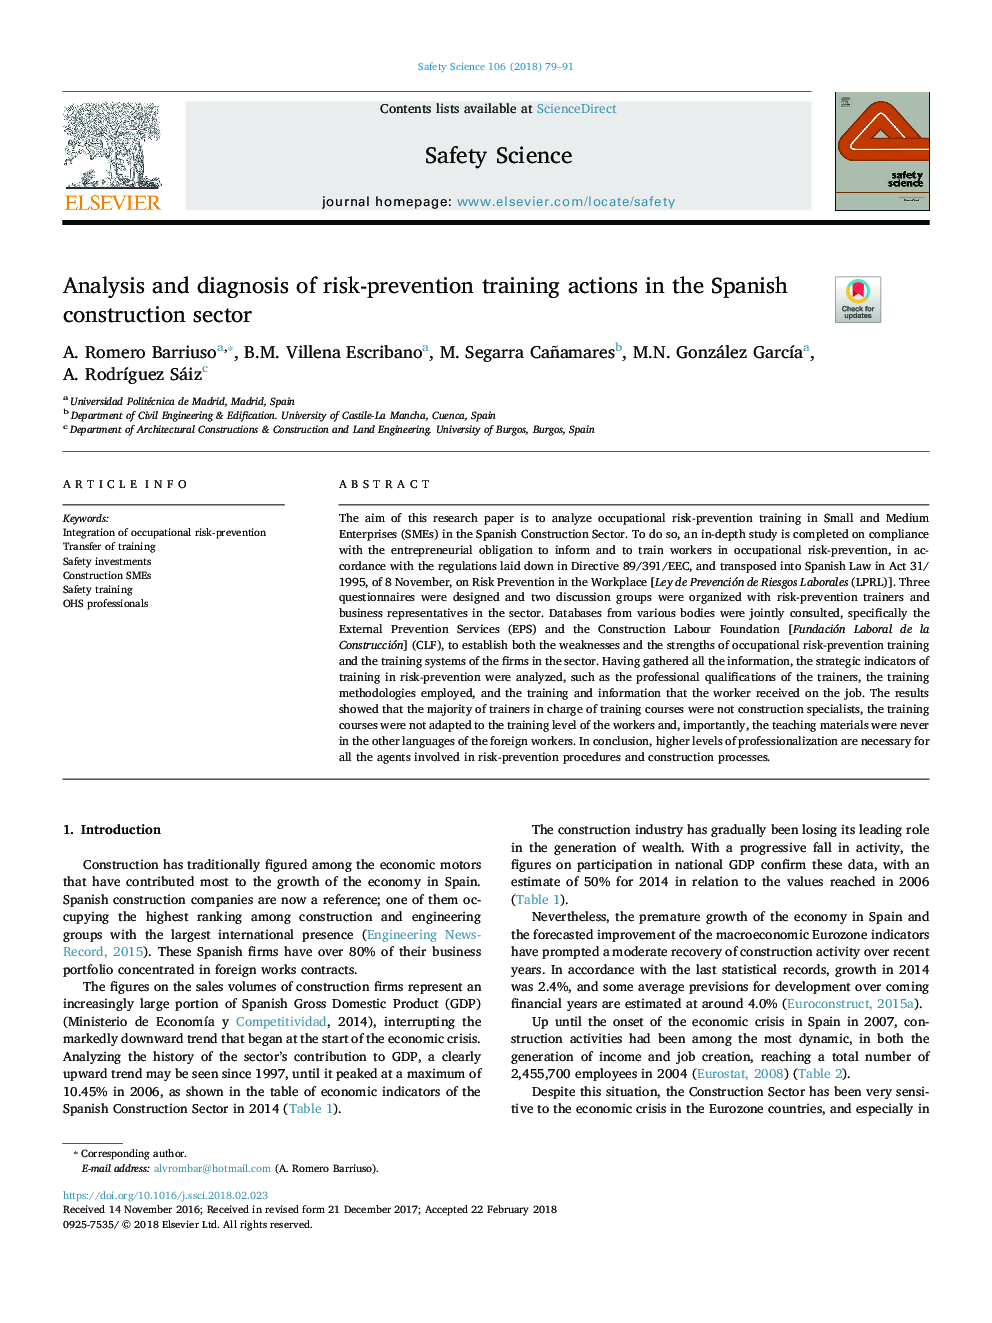 Analysis and diagnosis of risk-prevention training actions in the Spanish construction sector